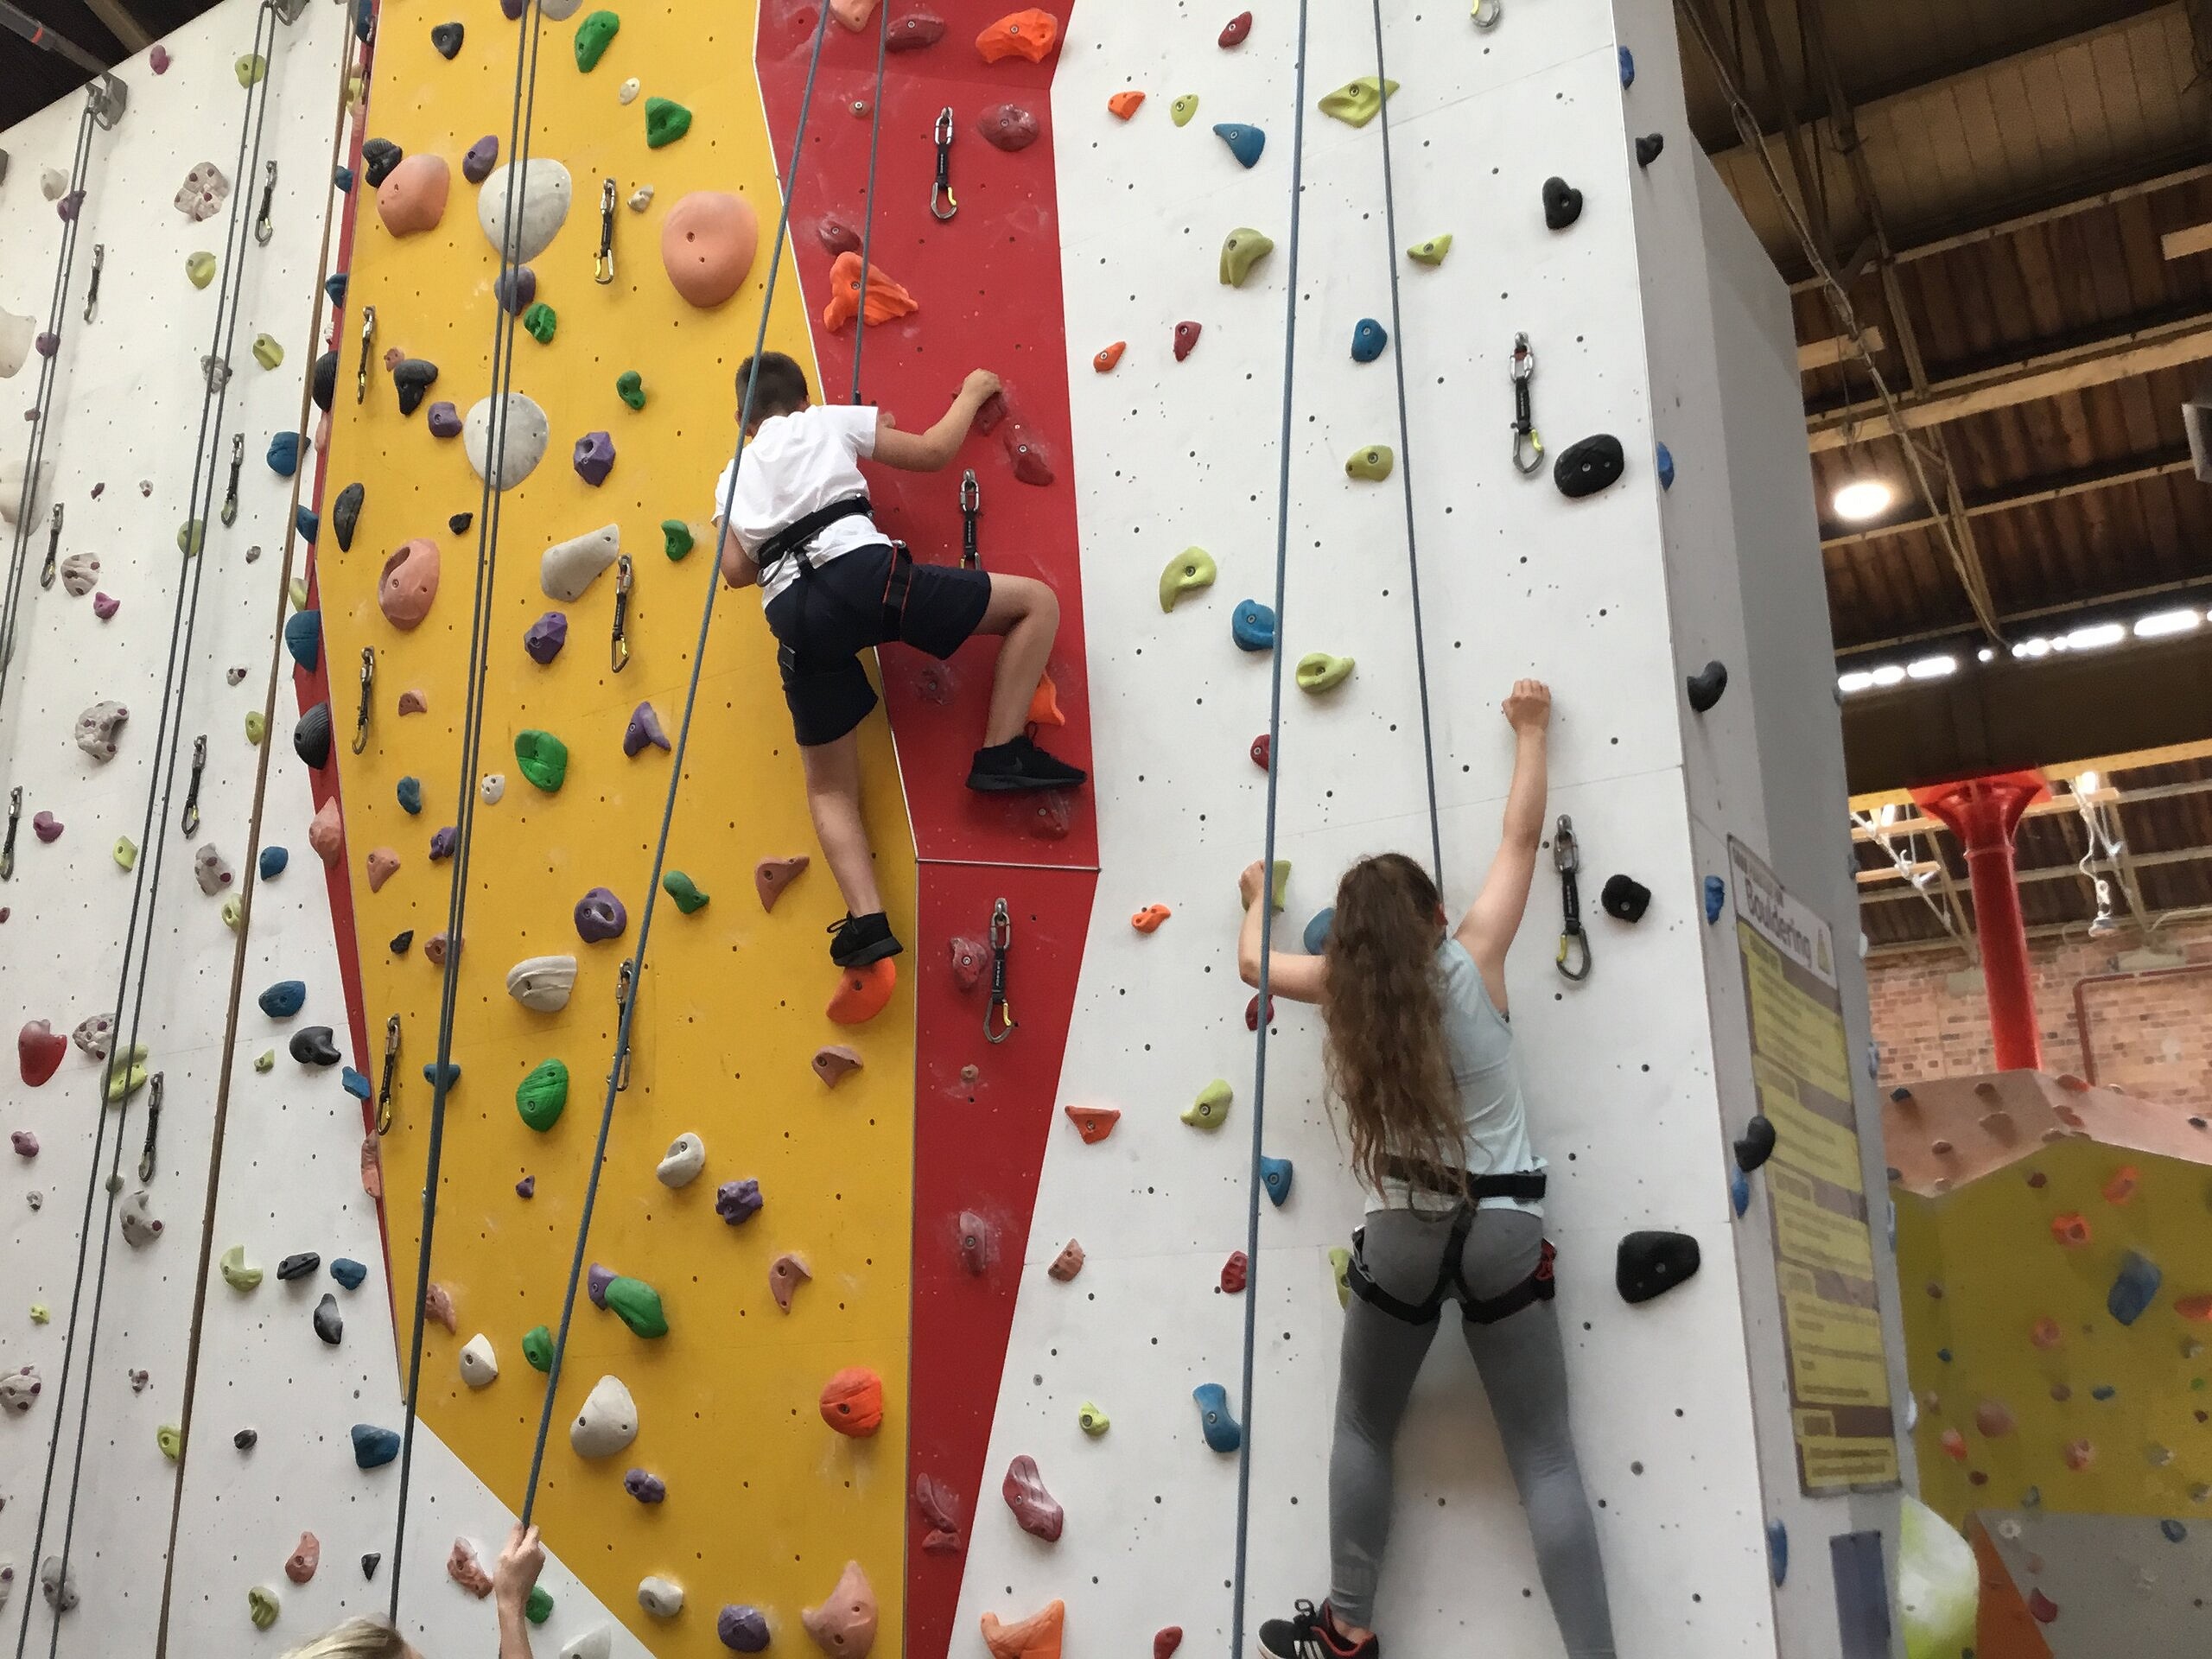 Children can learn empathy skills in climbing sessions.  © Olivia Bruton